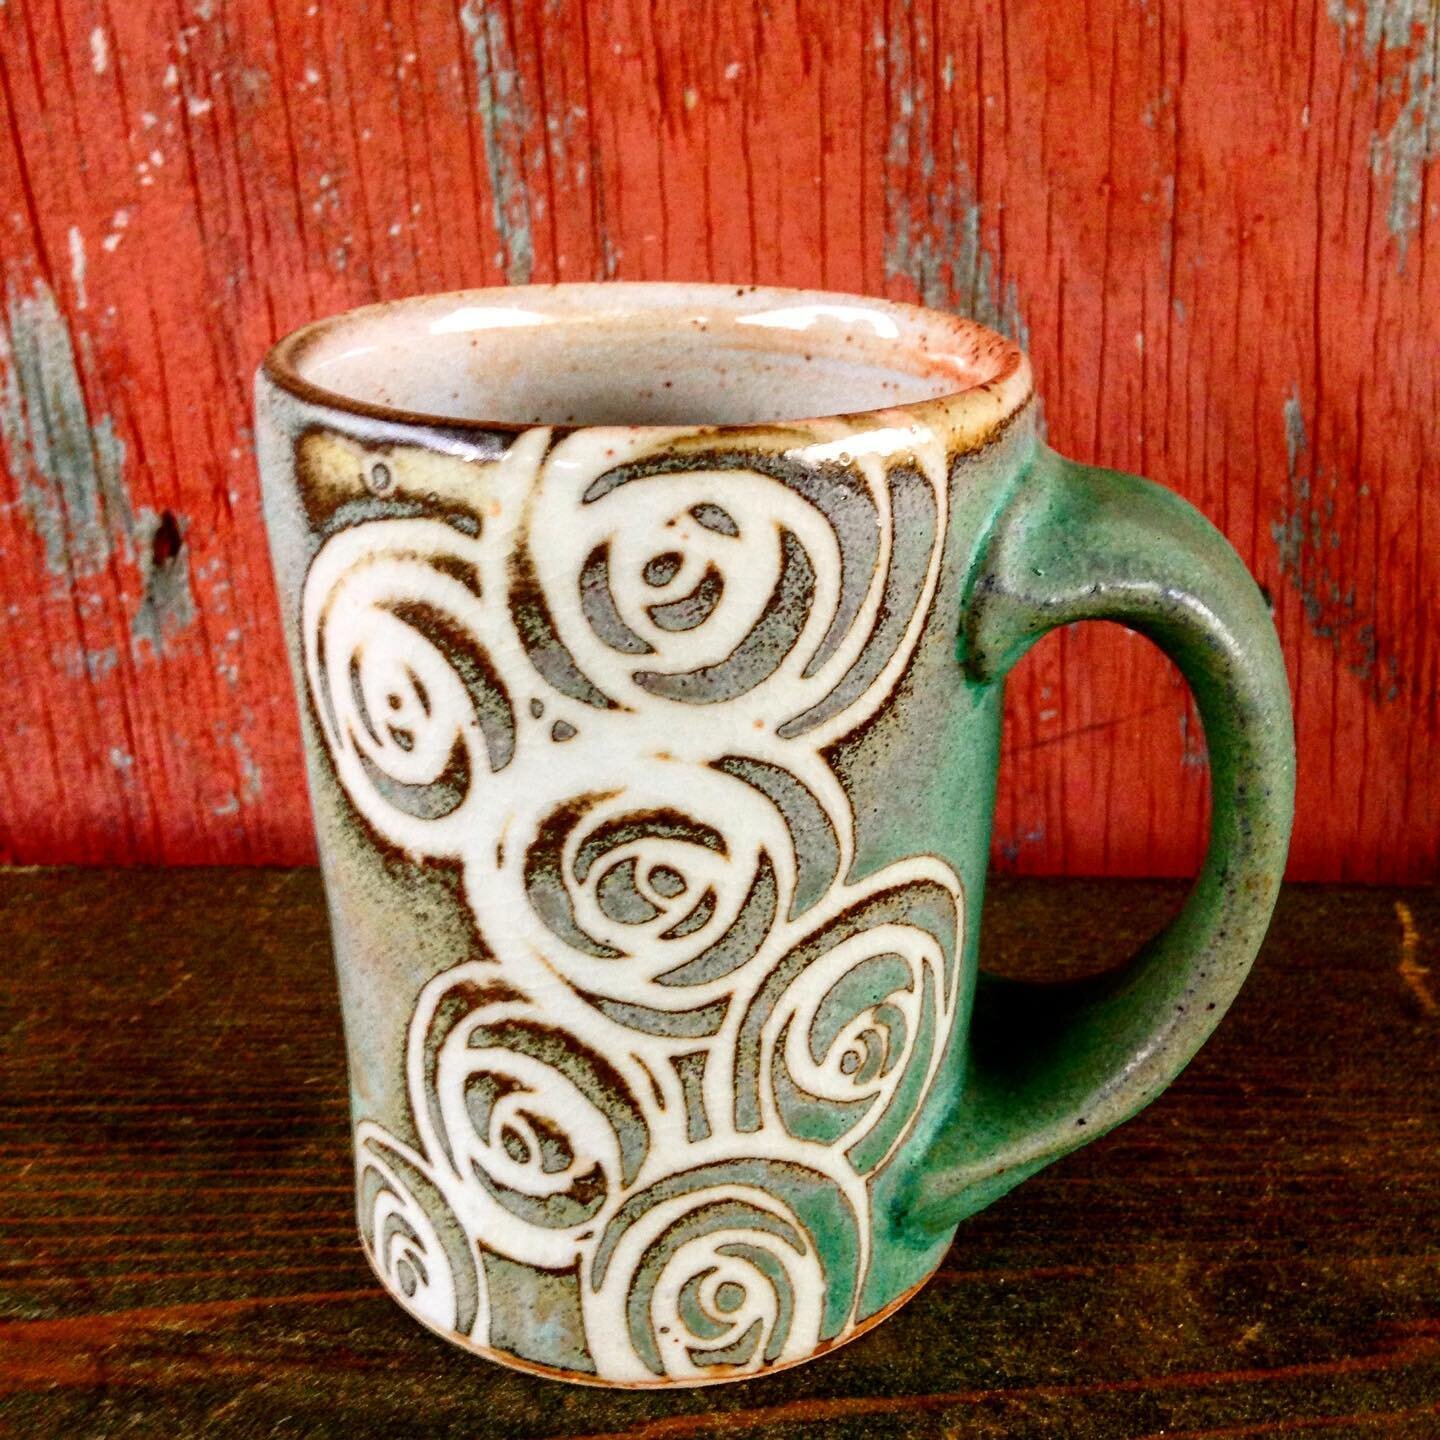 Scratchy circles mug. And a reminder that I need more #weathered red walls in my life.

#patterns#ashevilleartist#pottery#craft#handmadelife#slowcraft#functionalceramics#contemporaryceramics#designermaker#artisan#colorcompanion#coffee#myeverydaymagic